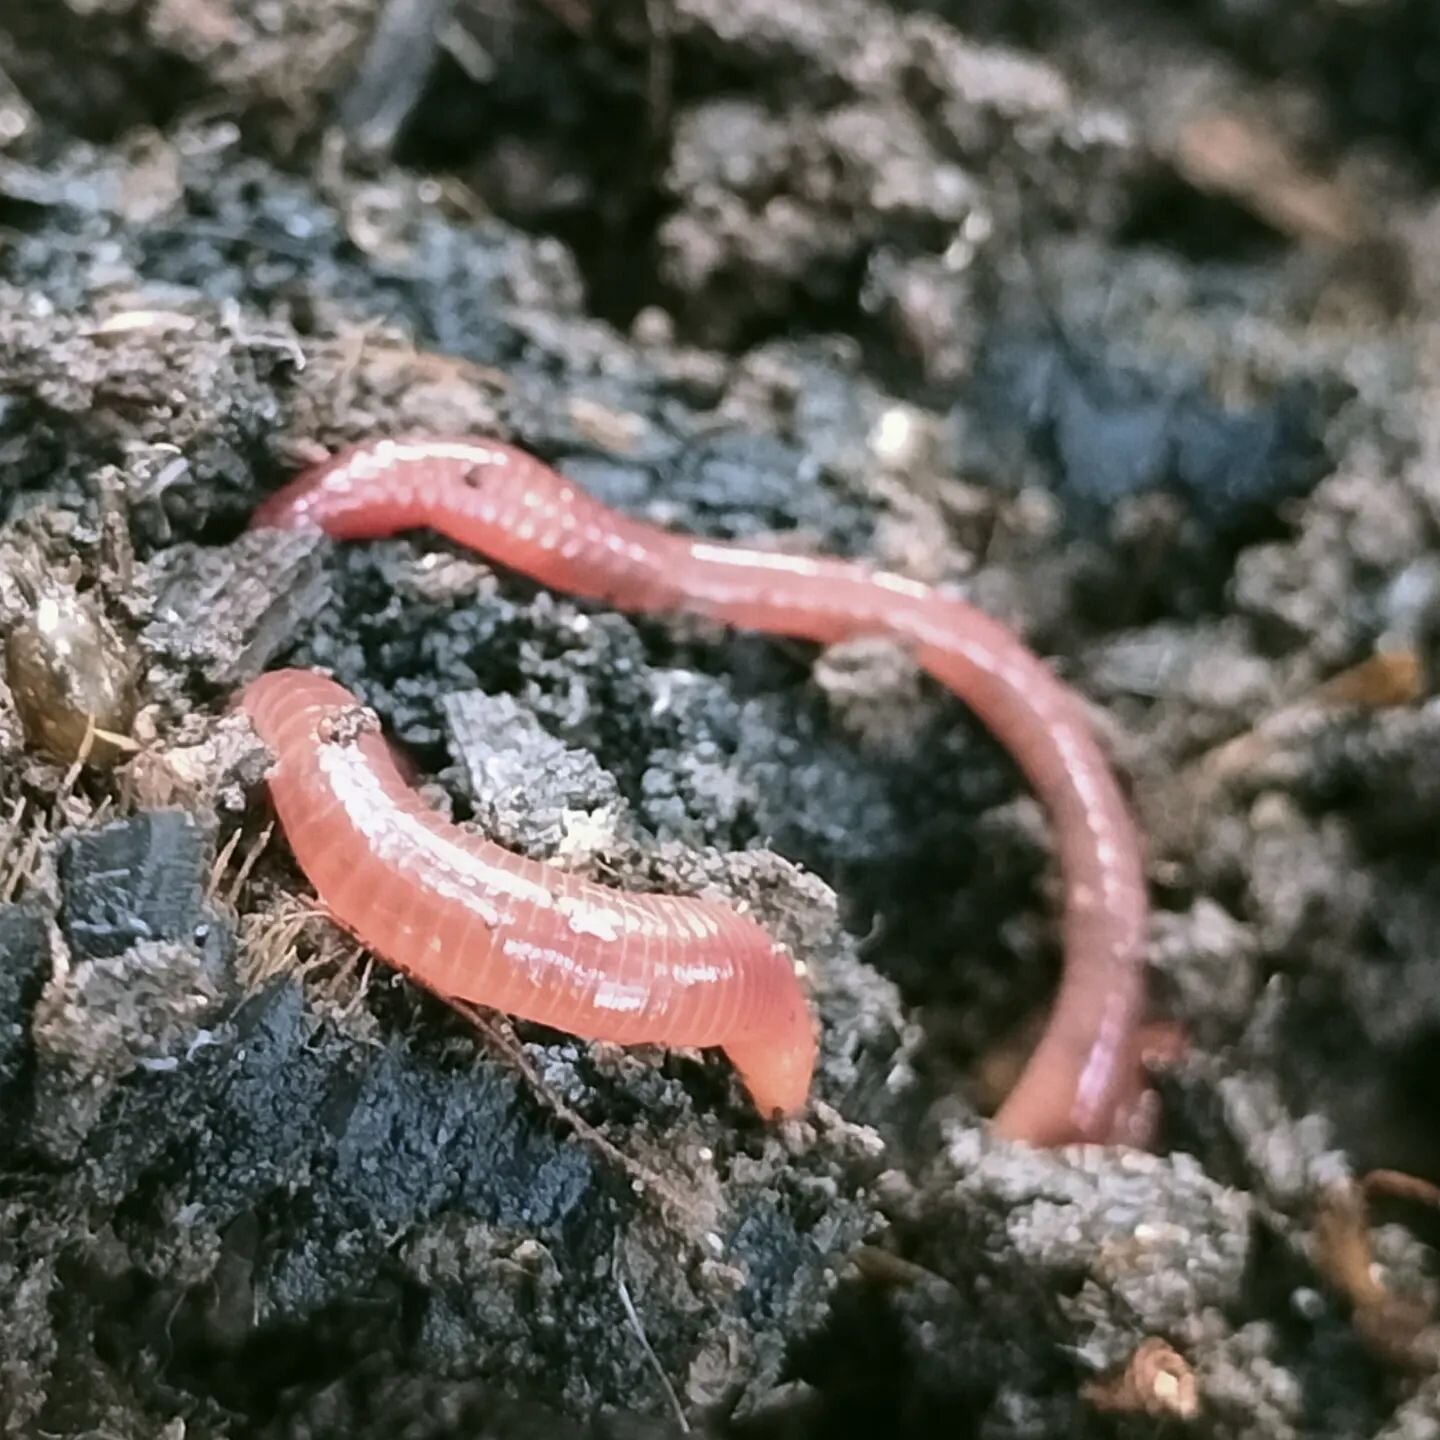 My worms are living their best life at the moment 🪱 ❤️🪱

Helping reduce food waste and giving an amazing byproduct for the garden in the process.

#backyarddiversity #inmygarden #wormfarm #worms #beneficialbugs